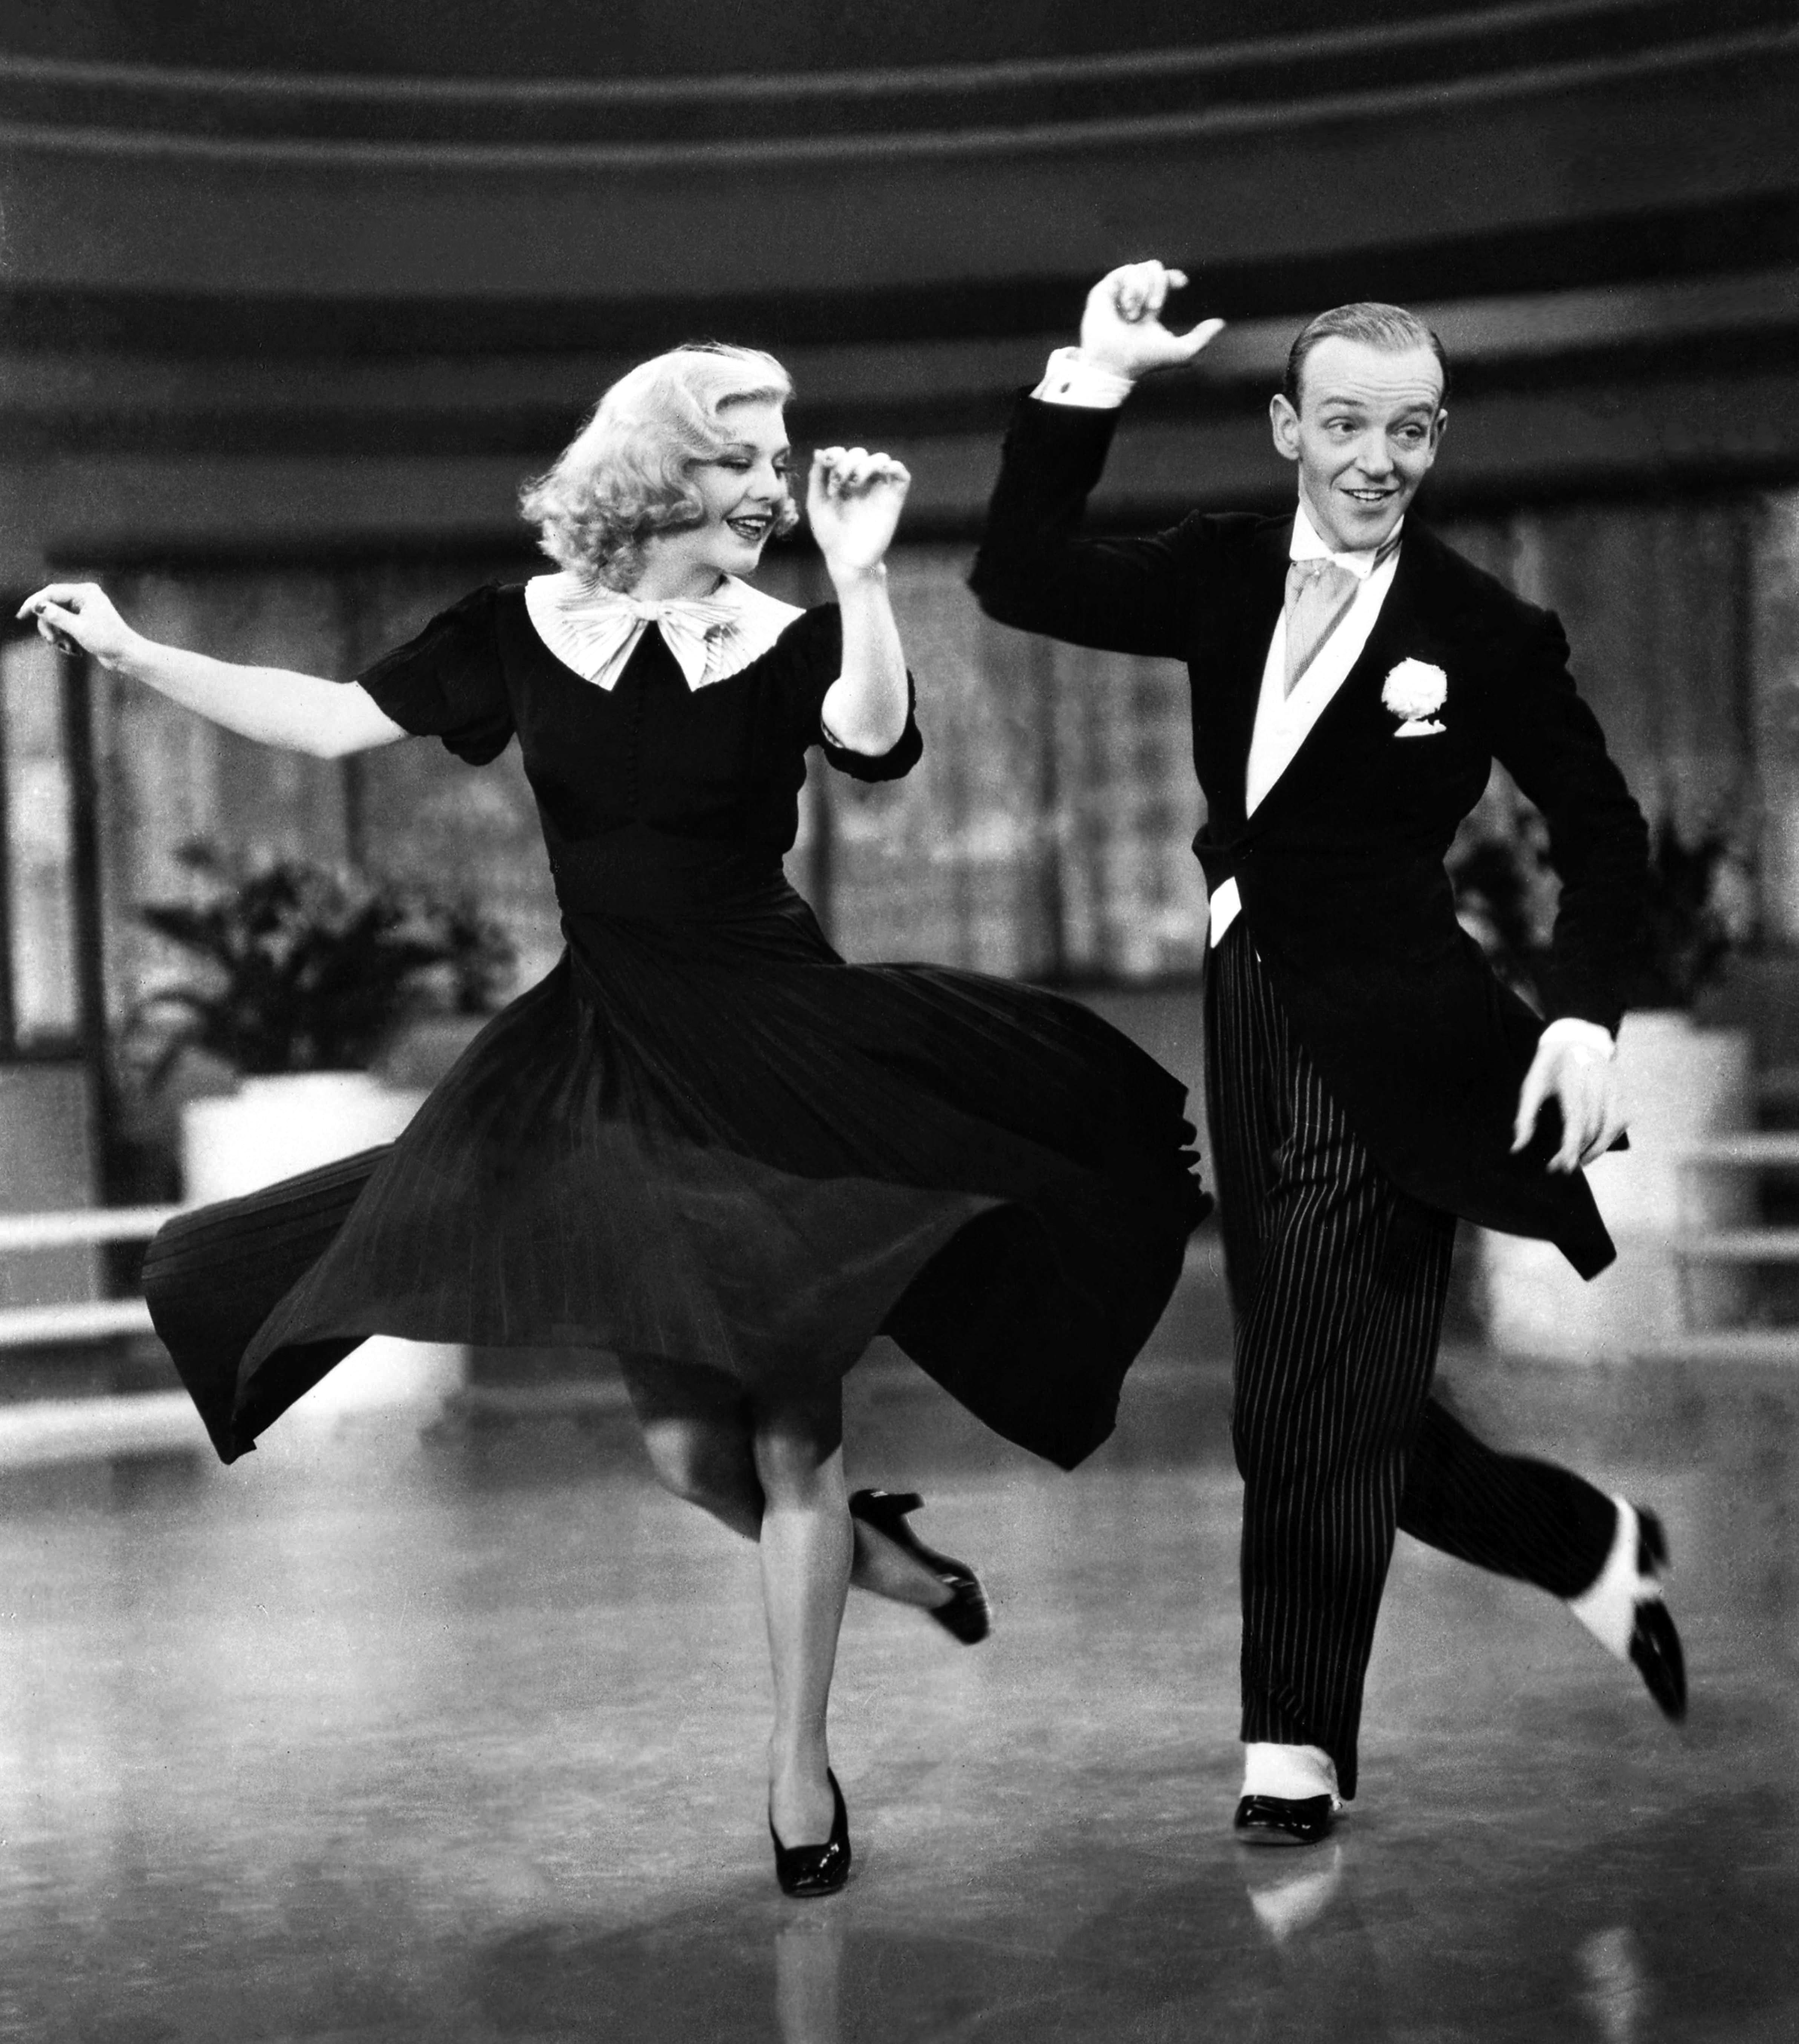 Unknown Portrait Photograph - Fred Astaire and Ginger Rogers in "Swing Time" Globe Photos Fine Art Print